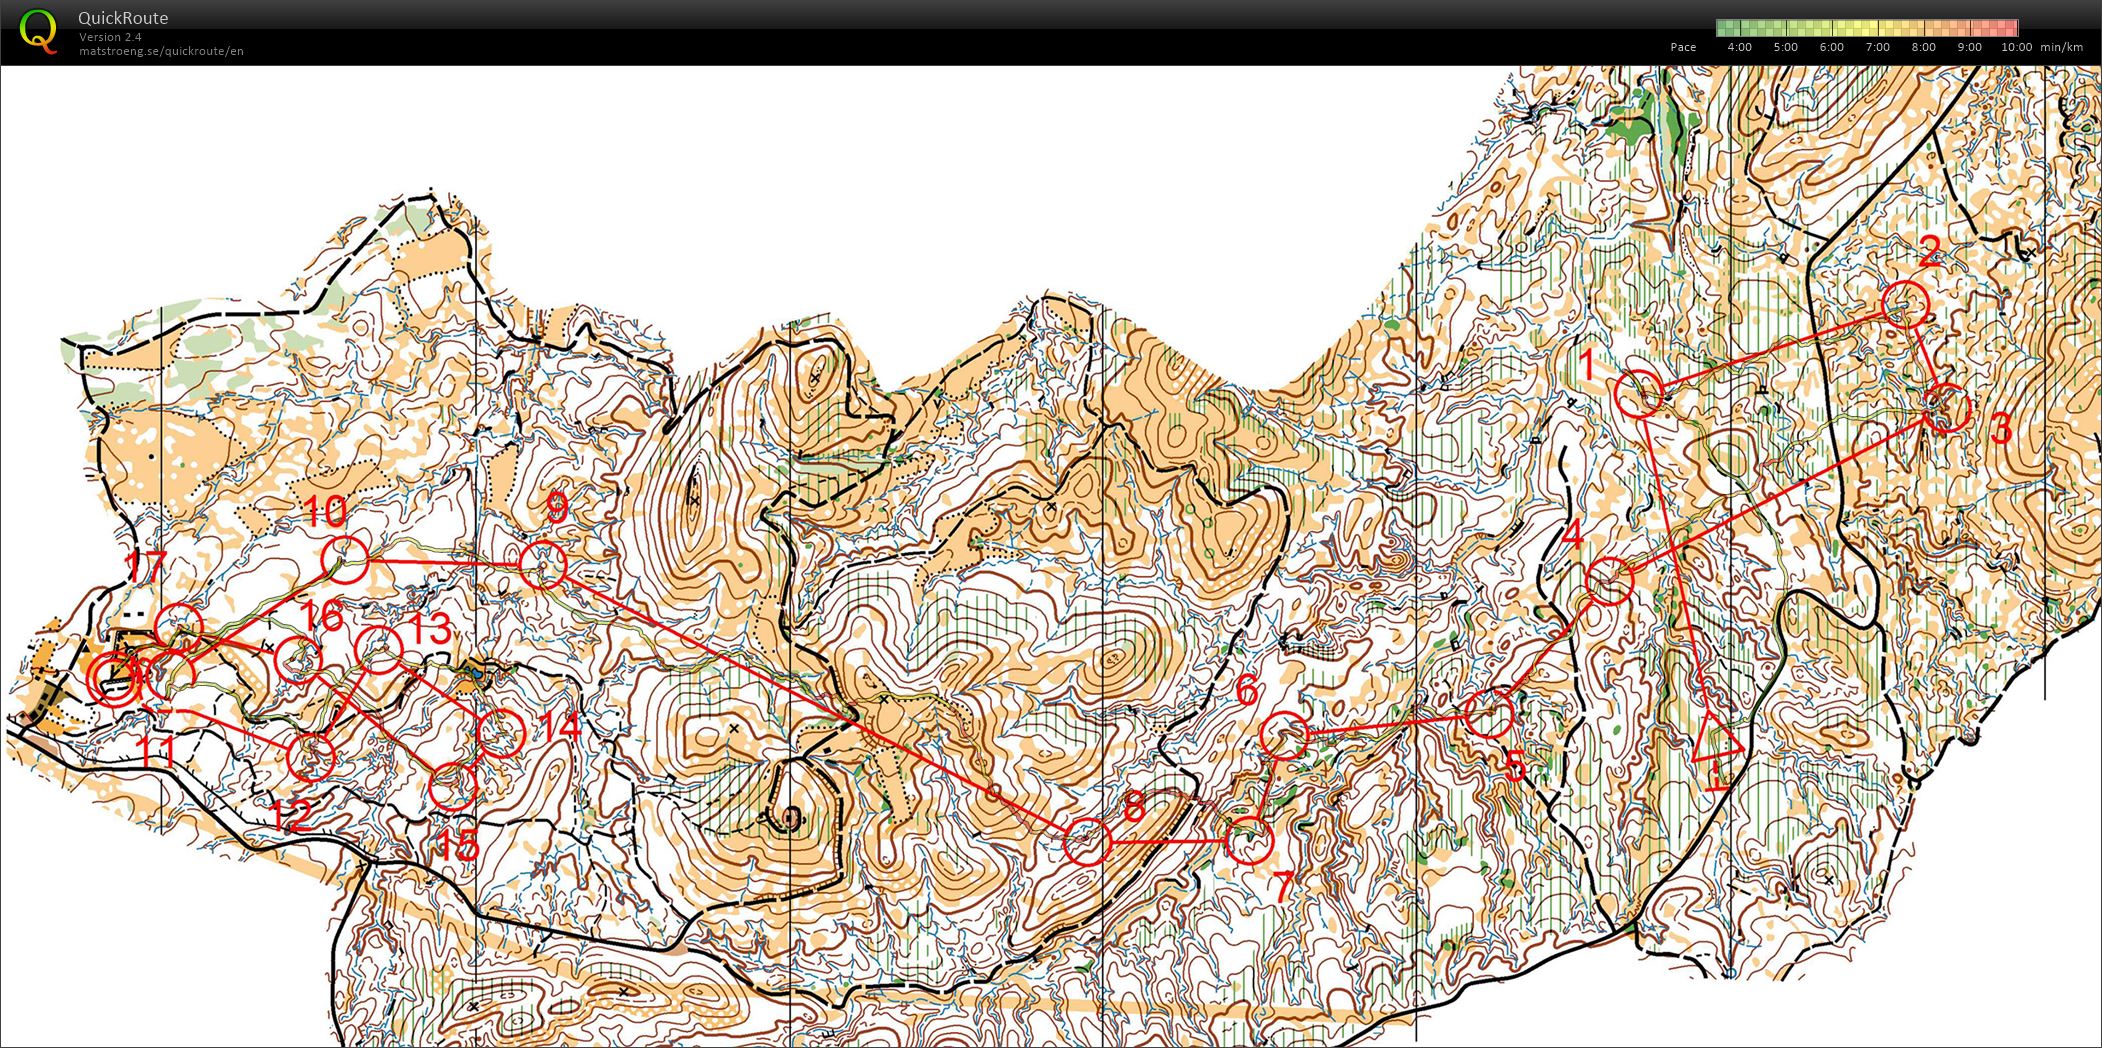 World Cup course W - middle  (2014-12-31)